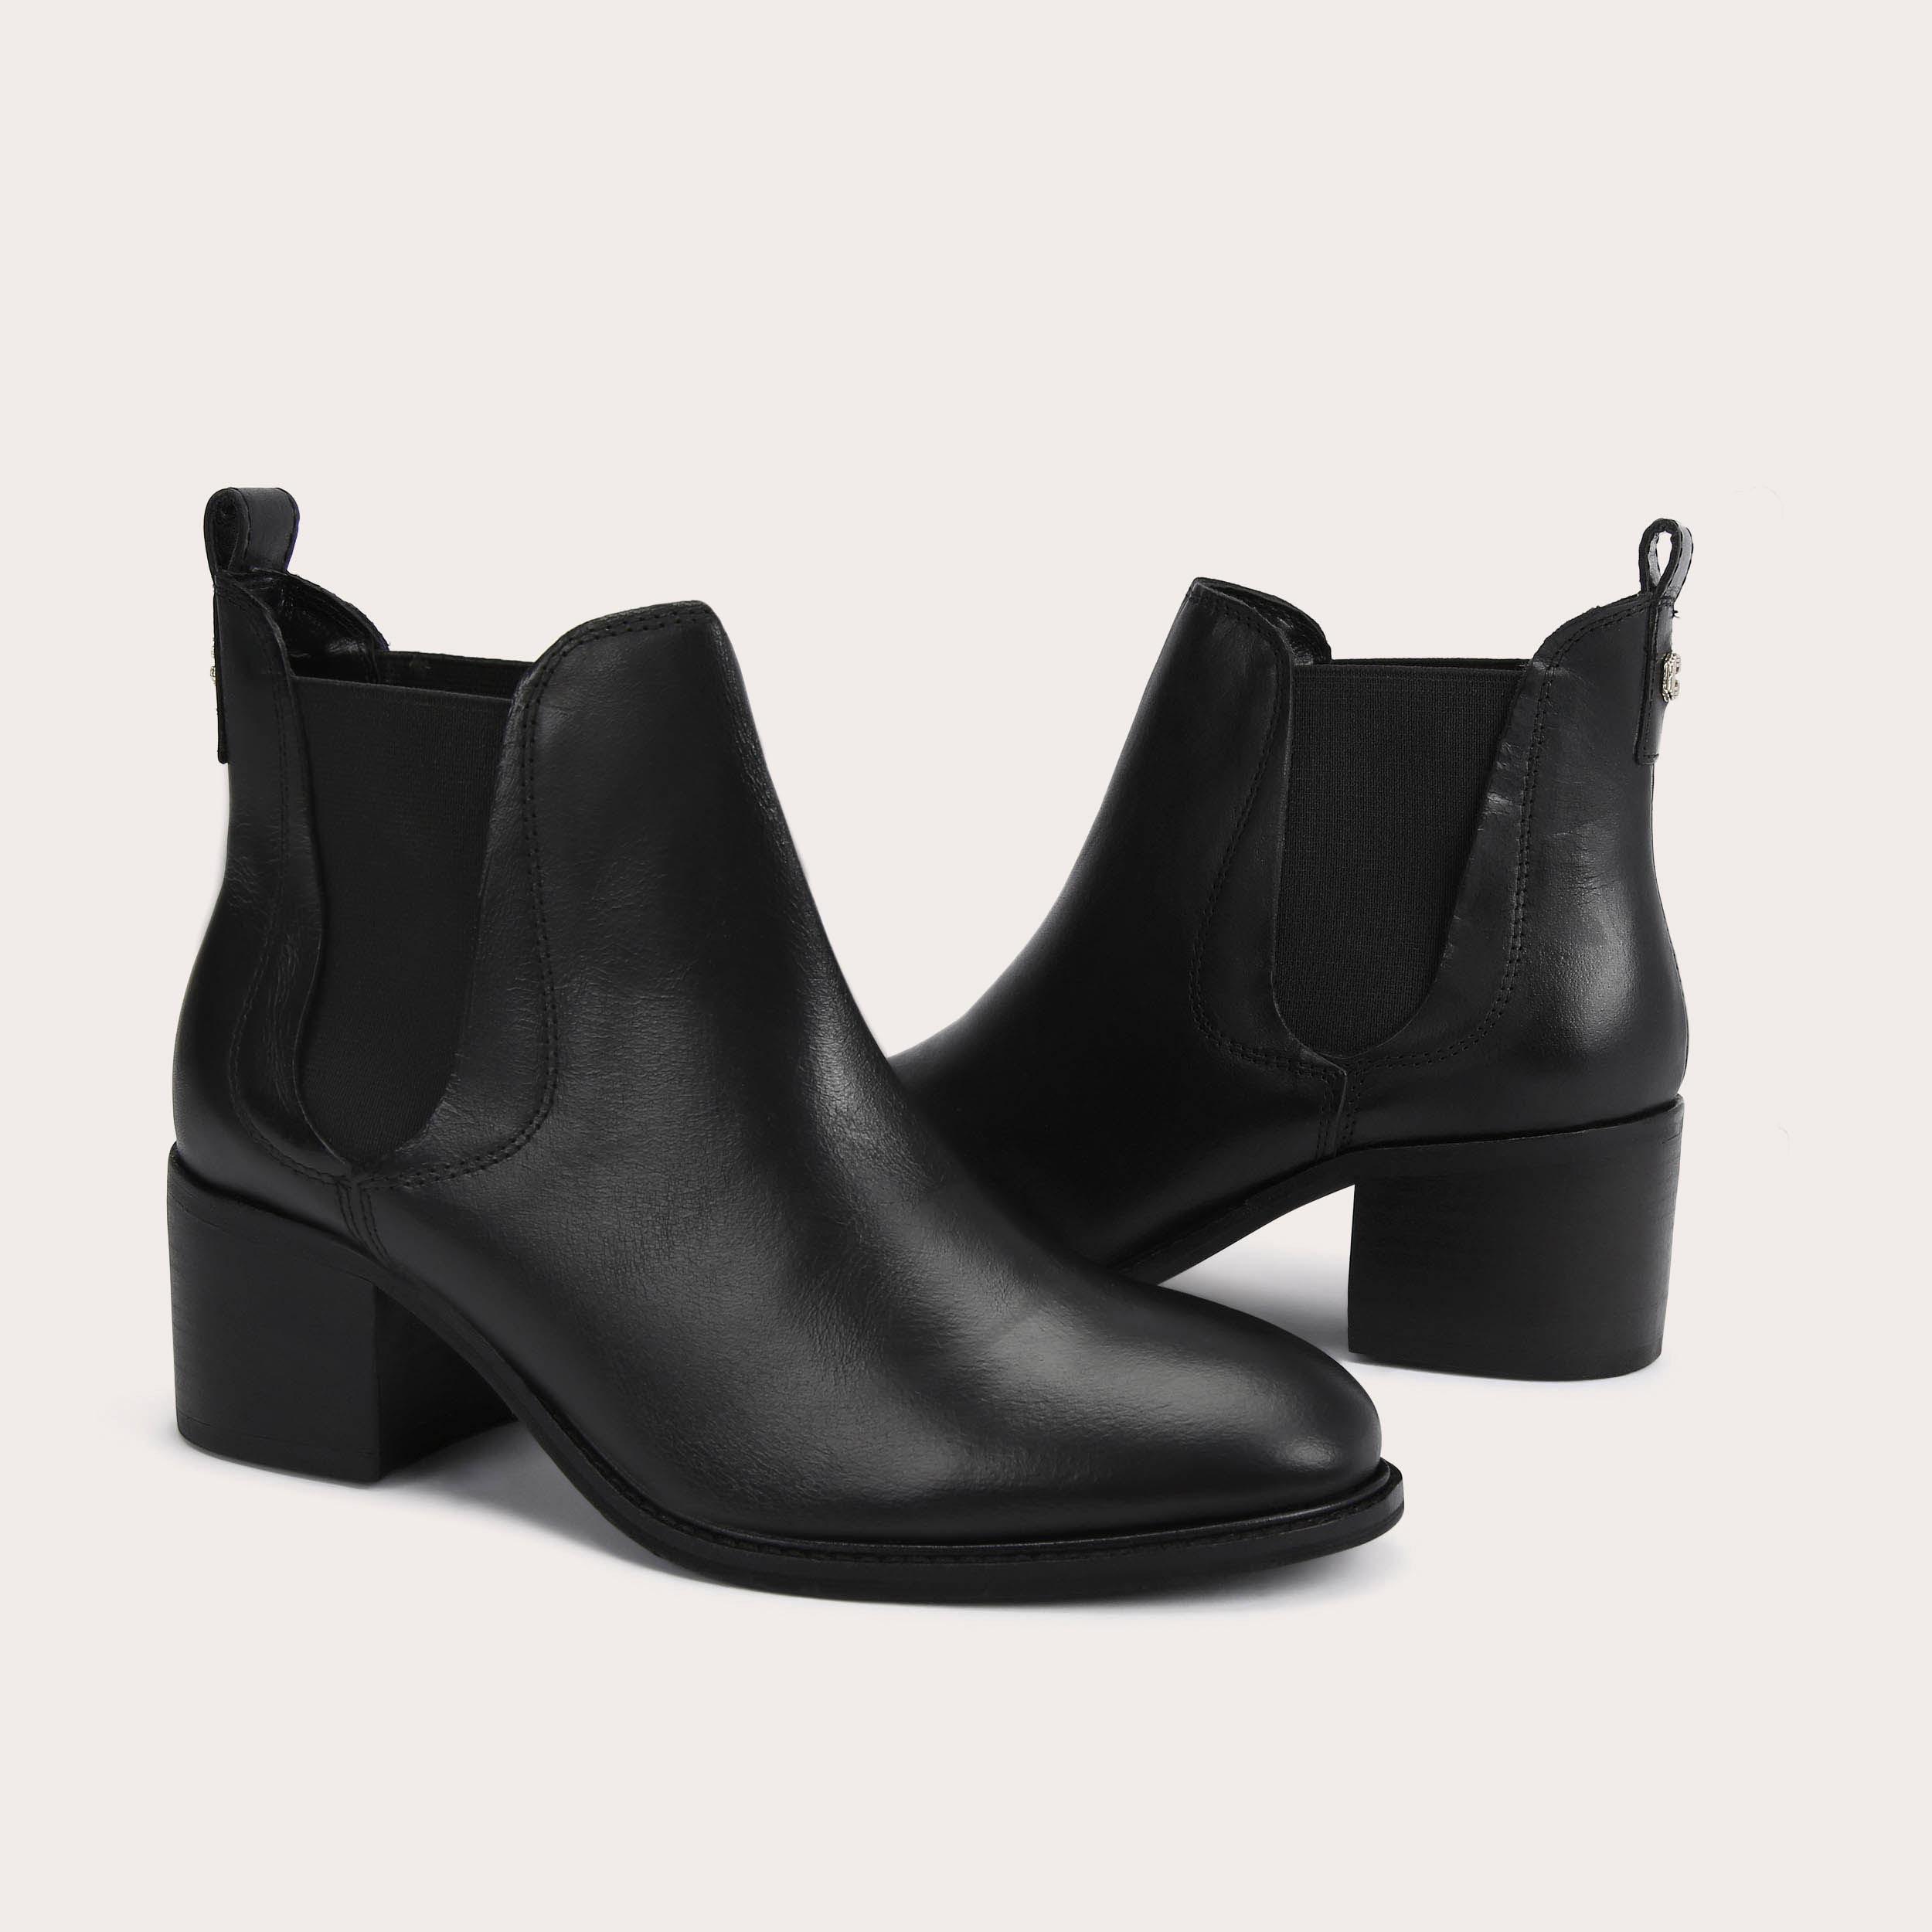 RONALD 2 Black Leather Ankle Boot by CARVELA COMFORT